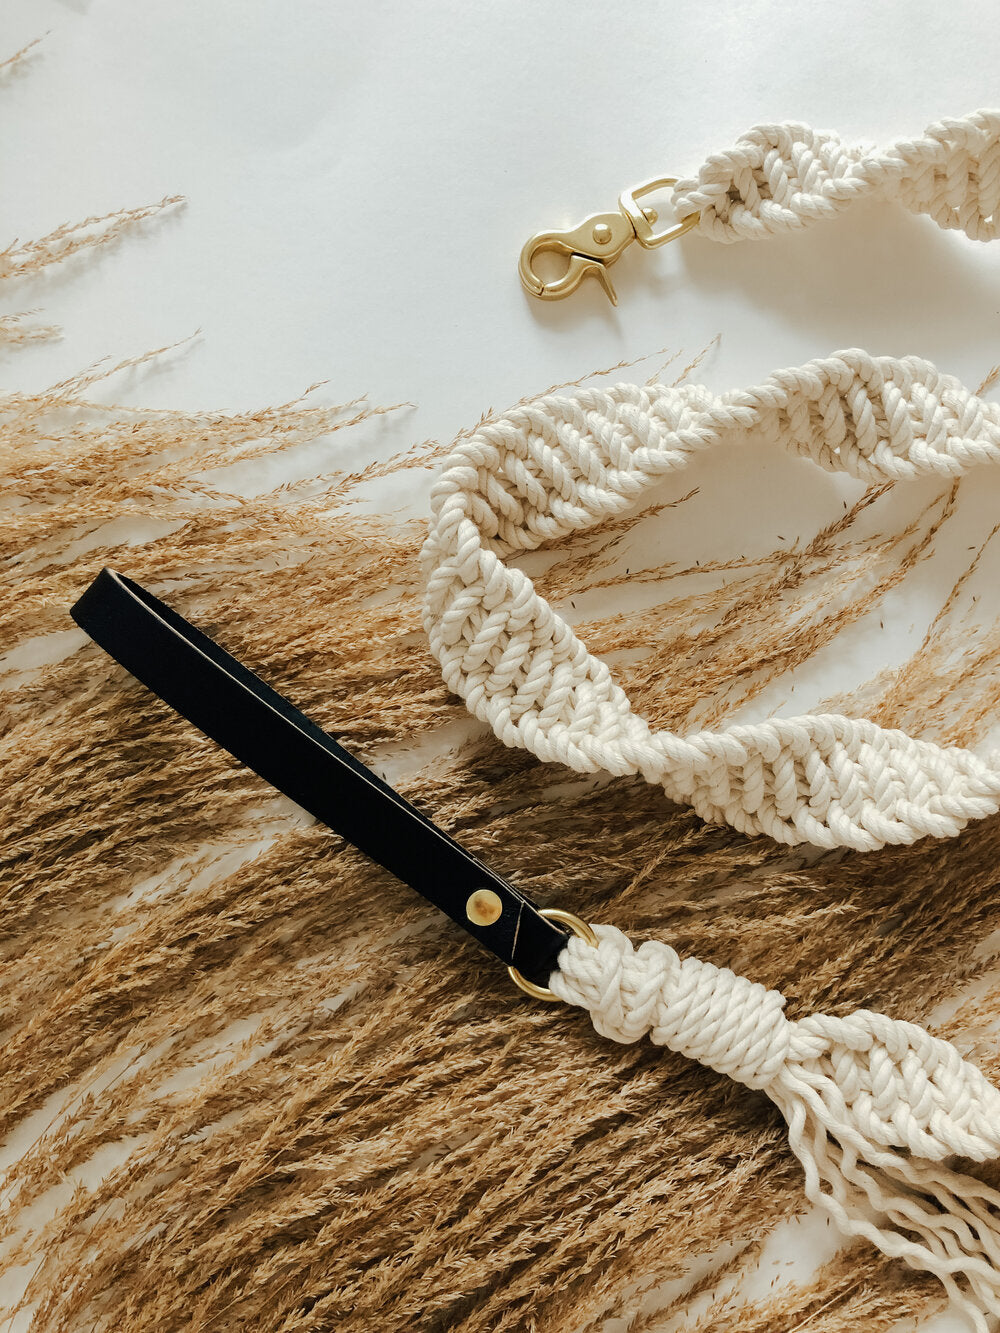 Ivory Macrame Lead with Black Leather Handle